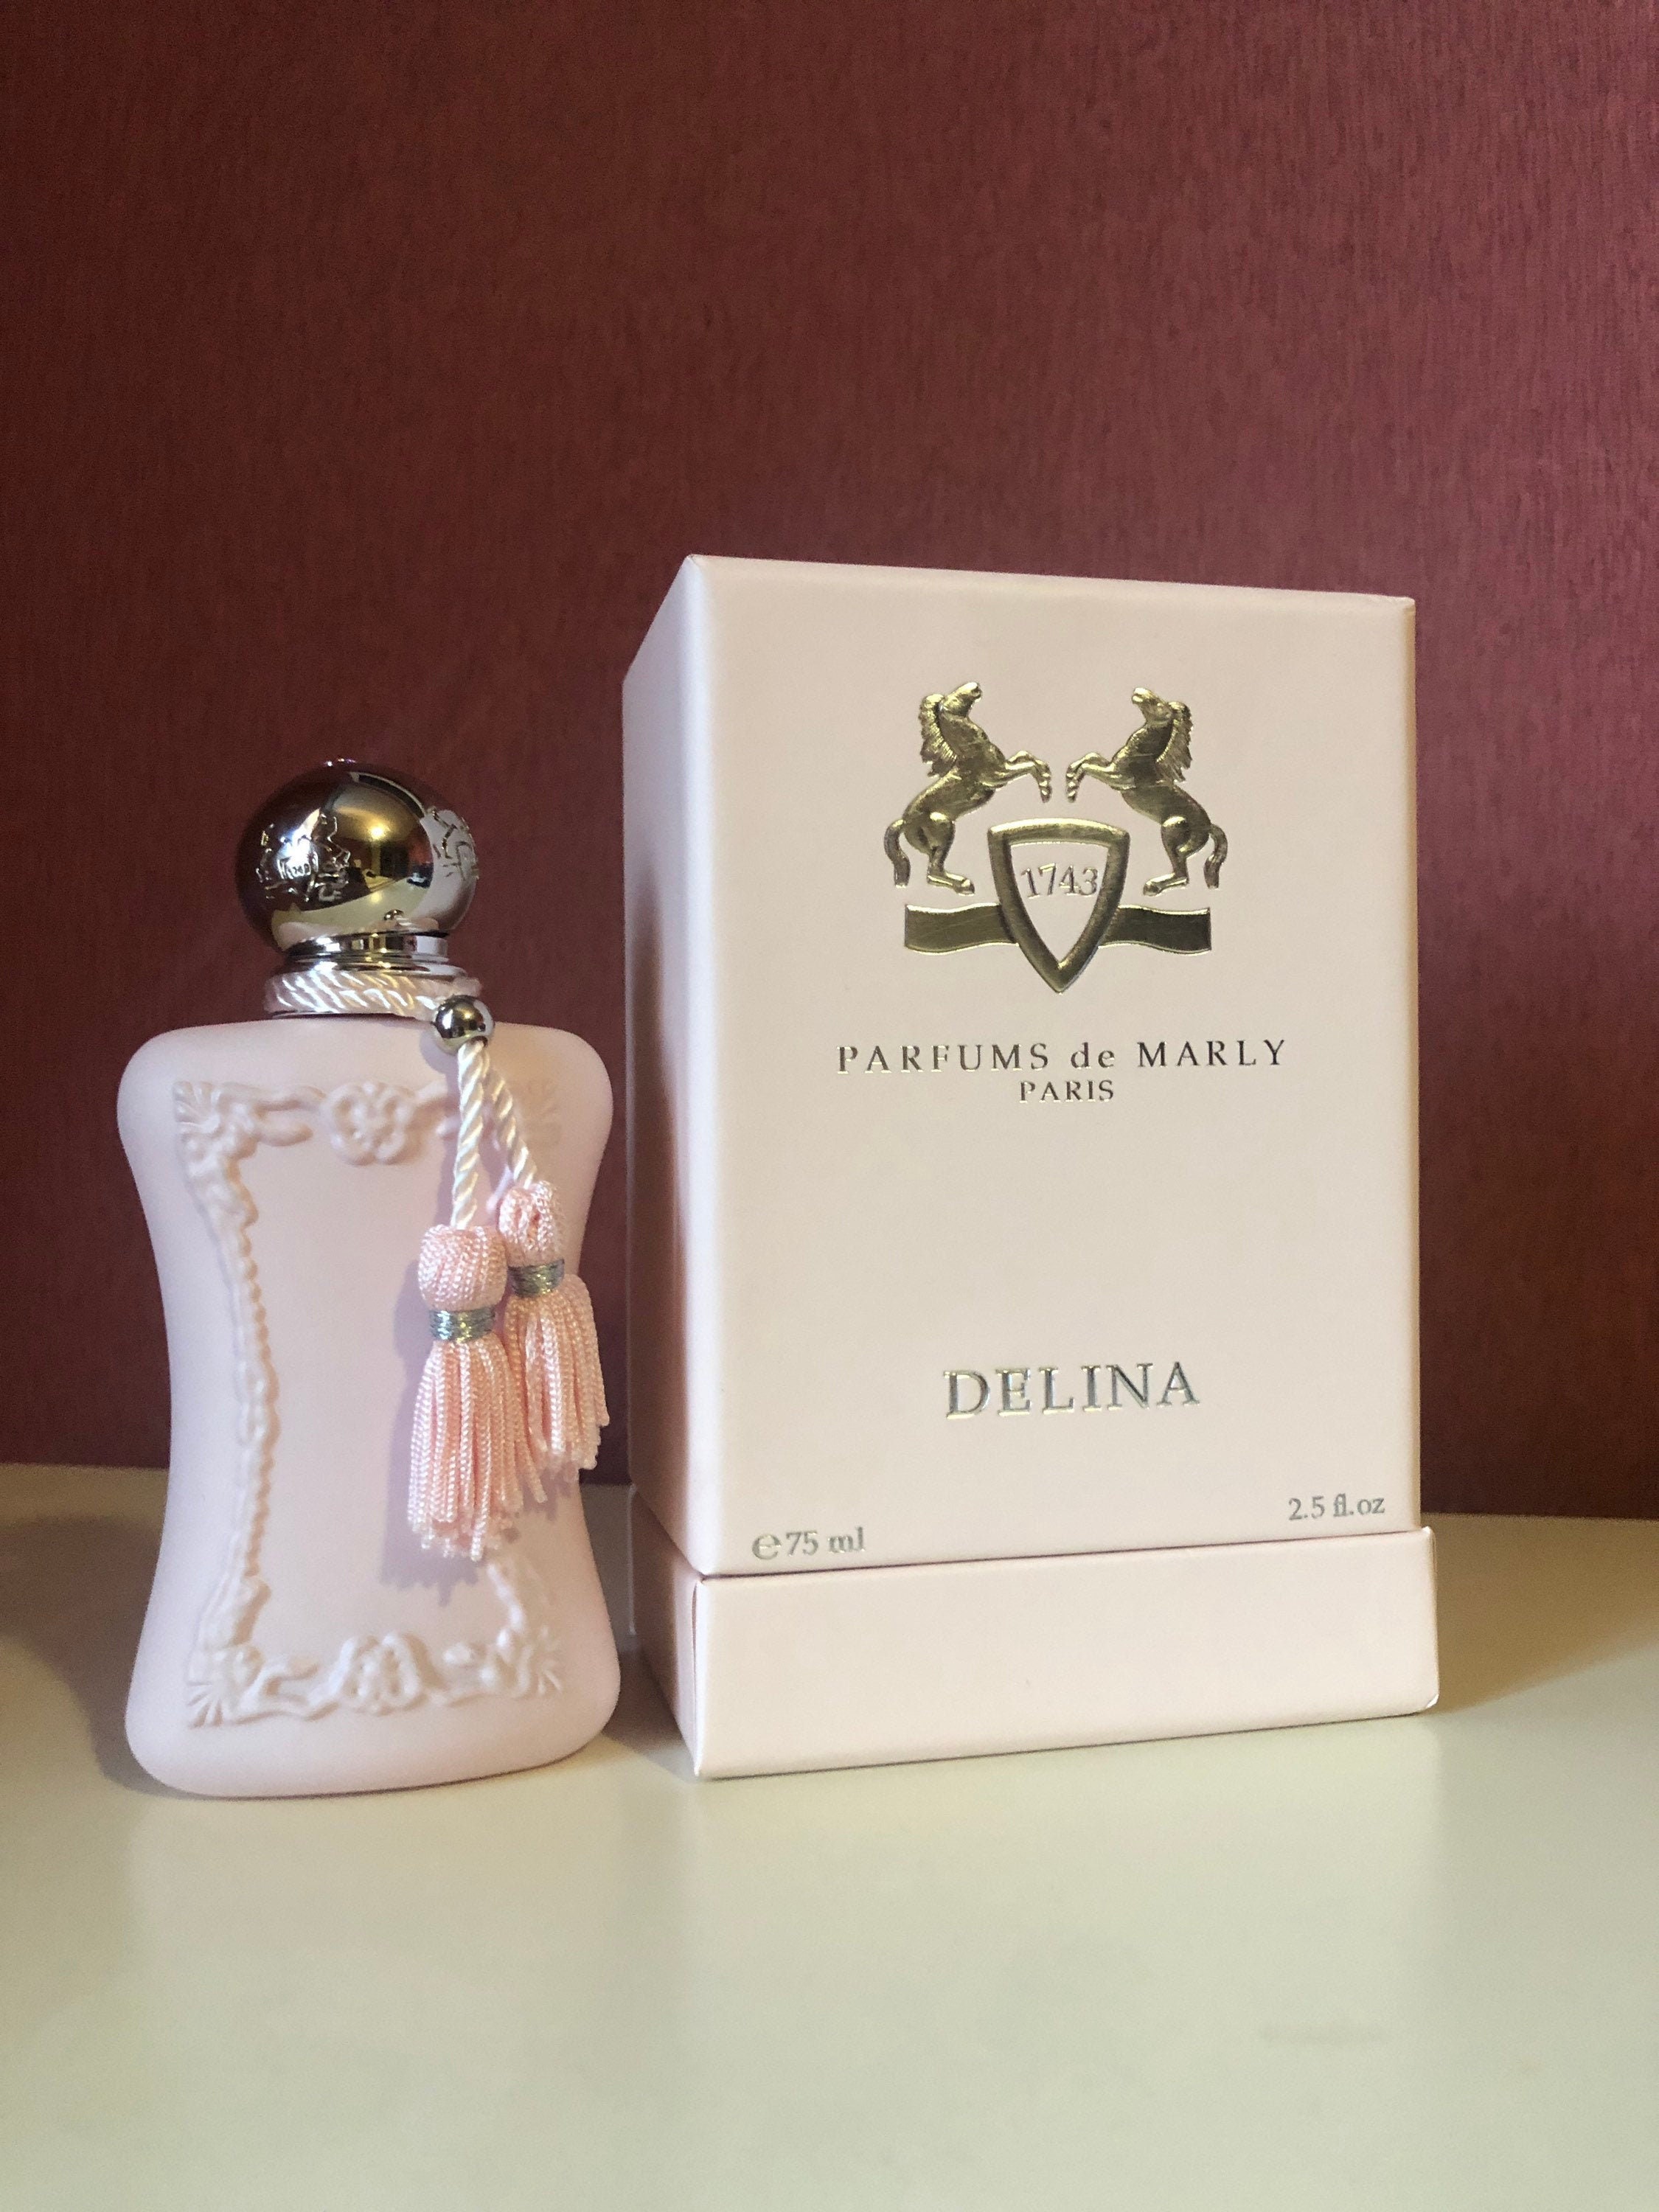 Delina parfums de Marly 75ml Royal Essence Gift for Women new | Etsy